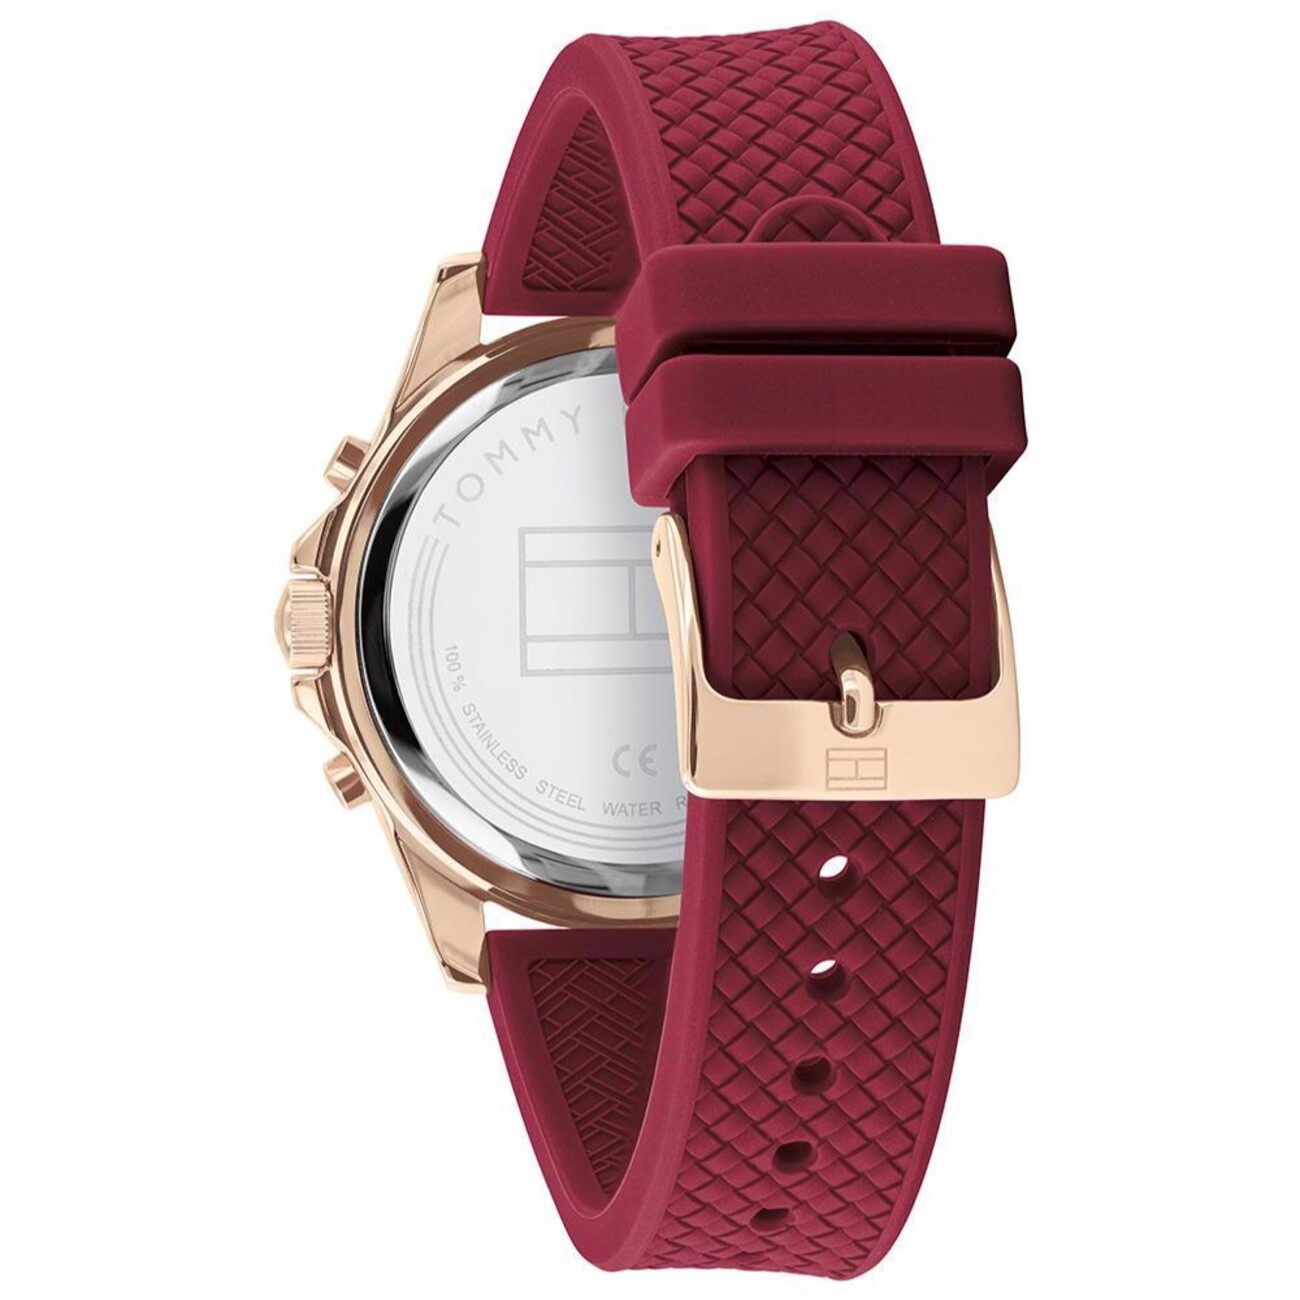 ĐỒNG HỒ ĐEO TAY NỮ TOMMY HILFIGER ROSE GOLD SPORT WATCH WITH RED SILICONE STRAP HAVEN ANALOG WATCH FOR WOMEN TH1782200W 12